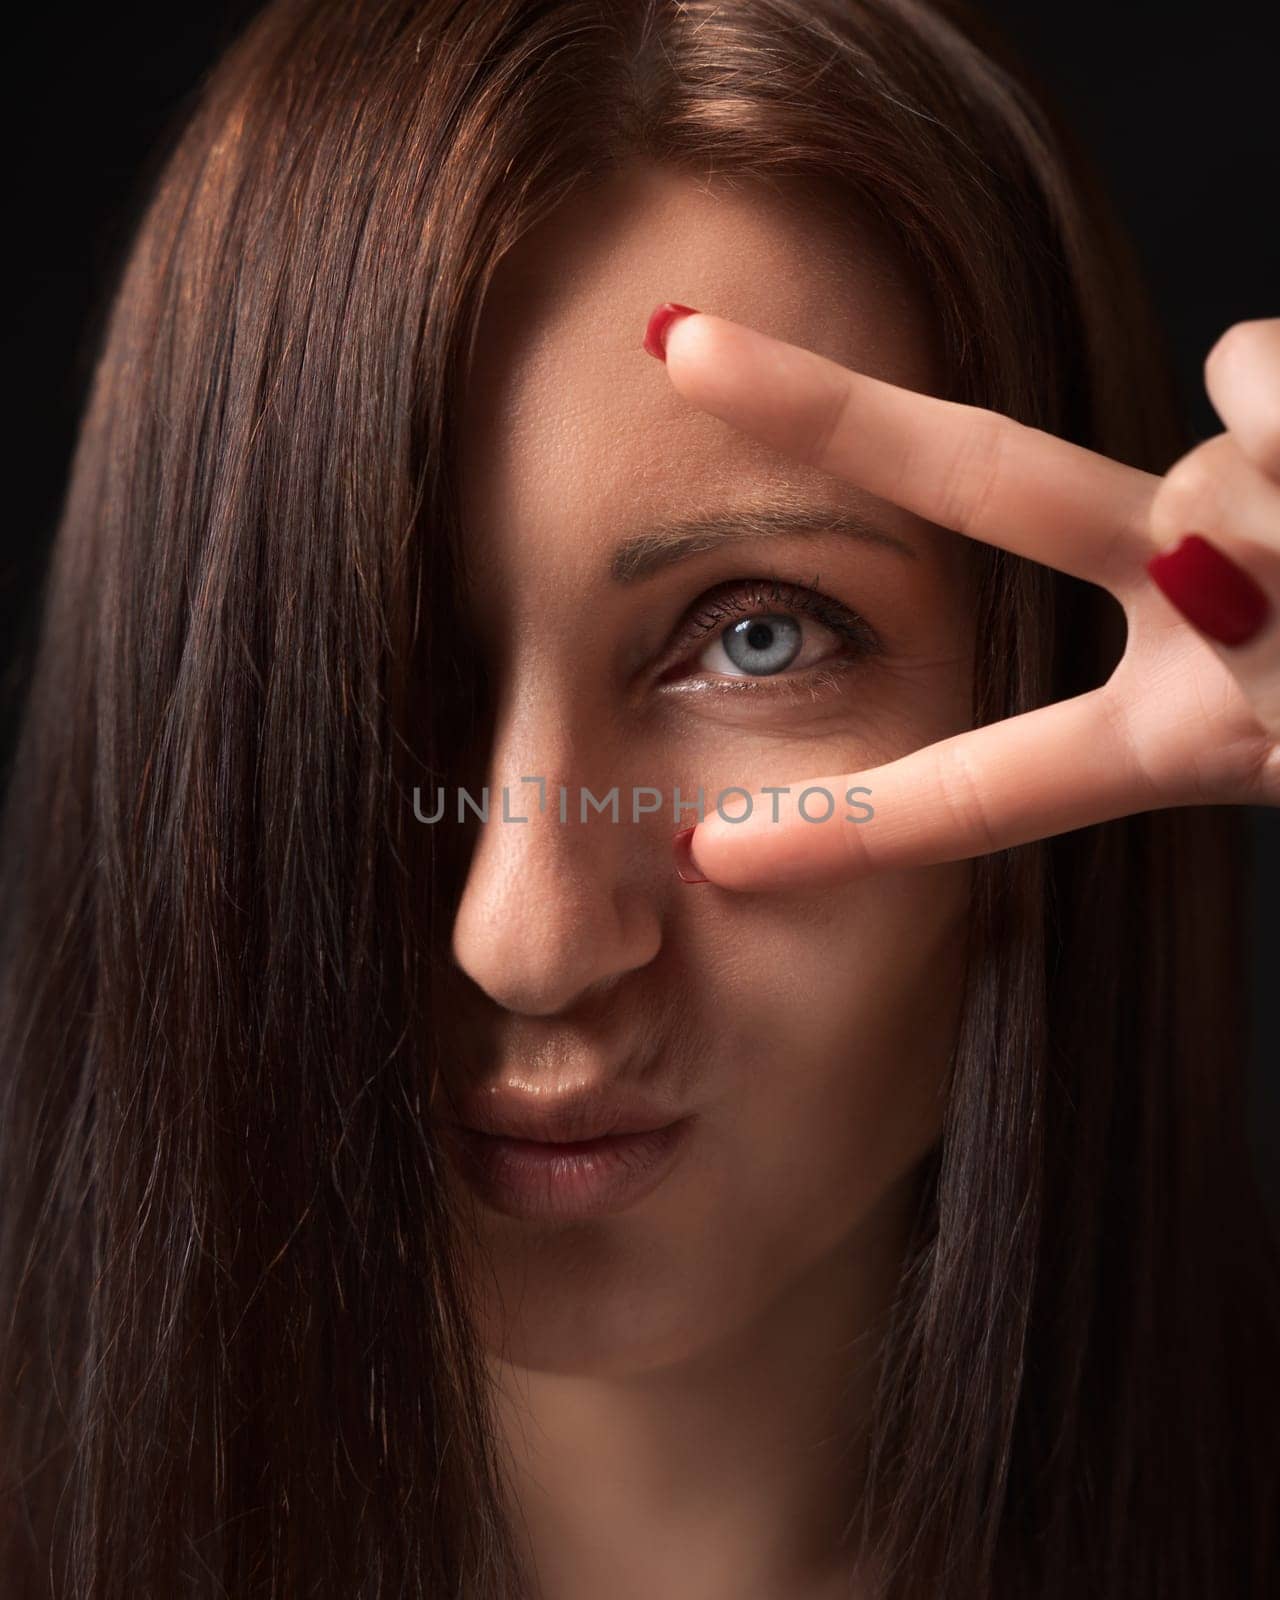 Closeup portrait of woman showing victory or peace gesture with fingers near gray eye and looking at camera. Front view of brunette lady with long hair covering one eye and outstretched lips.